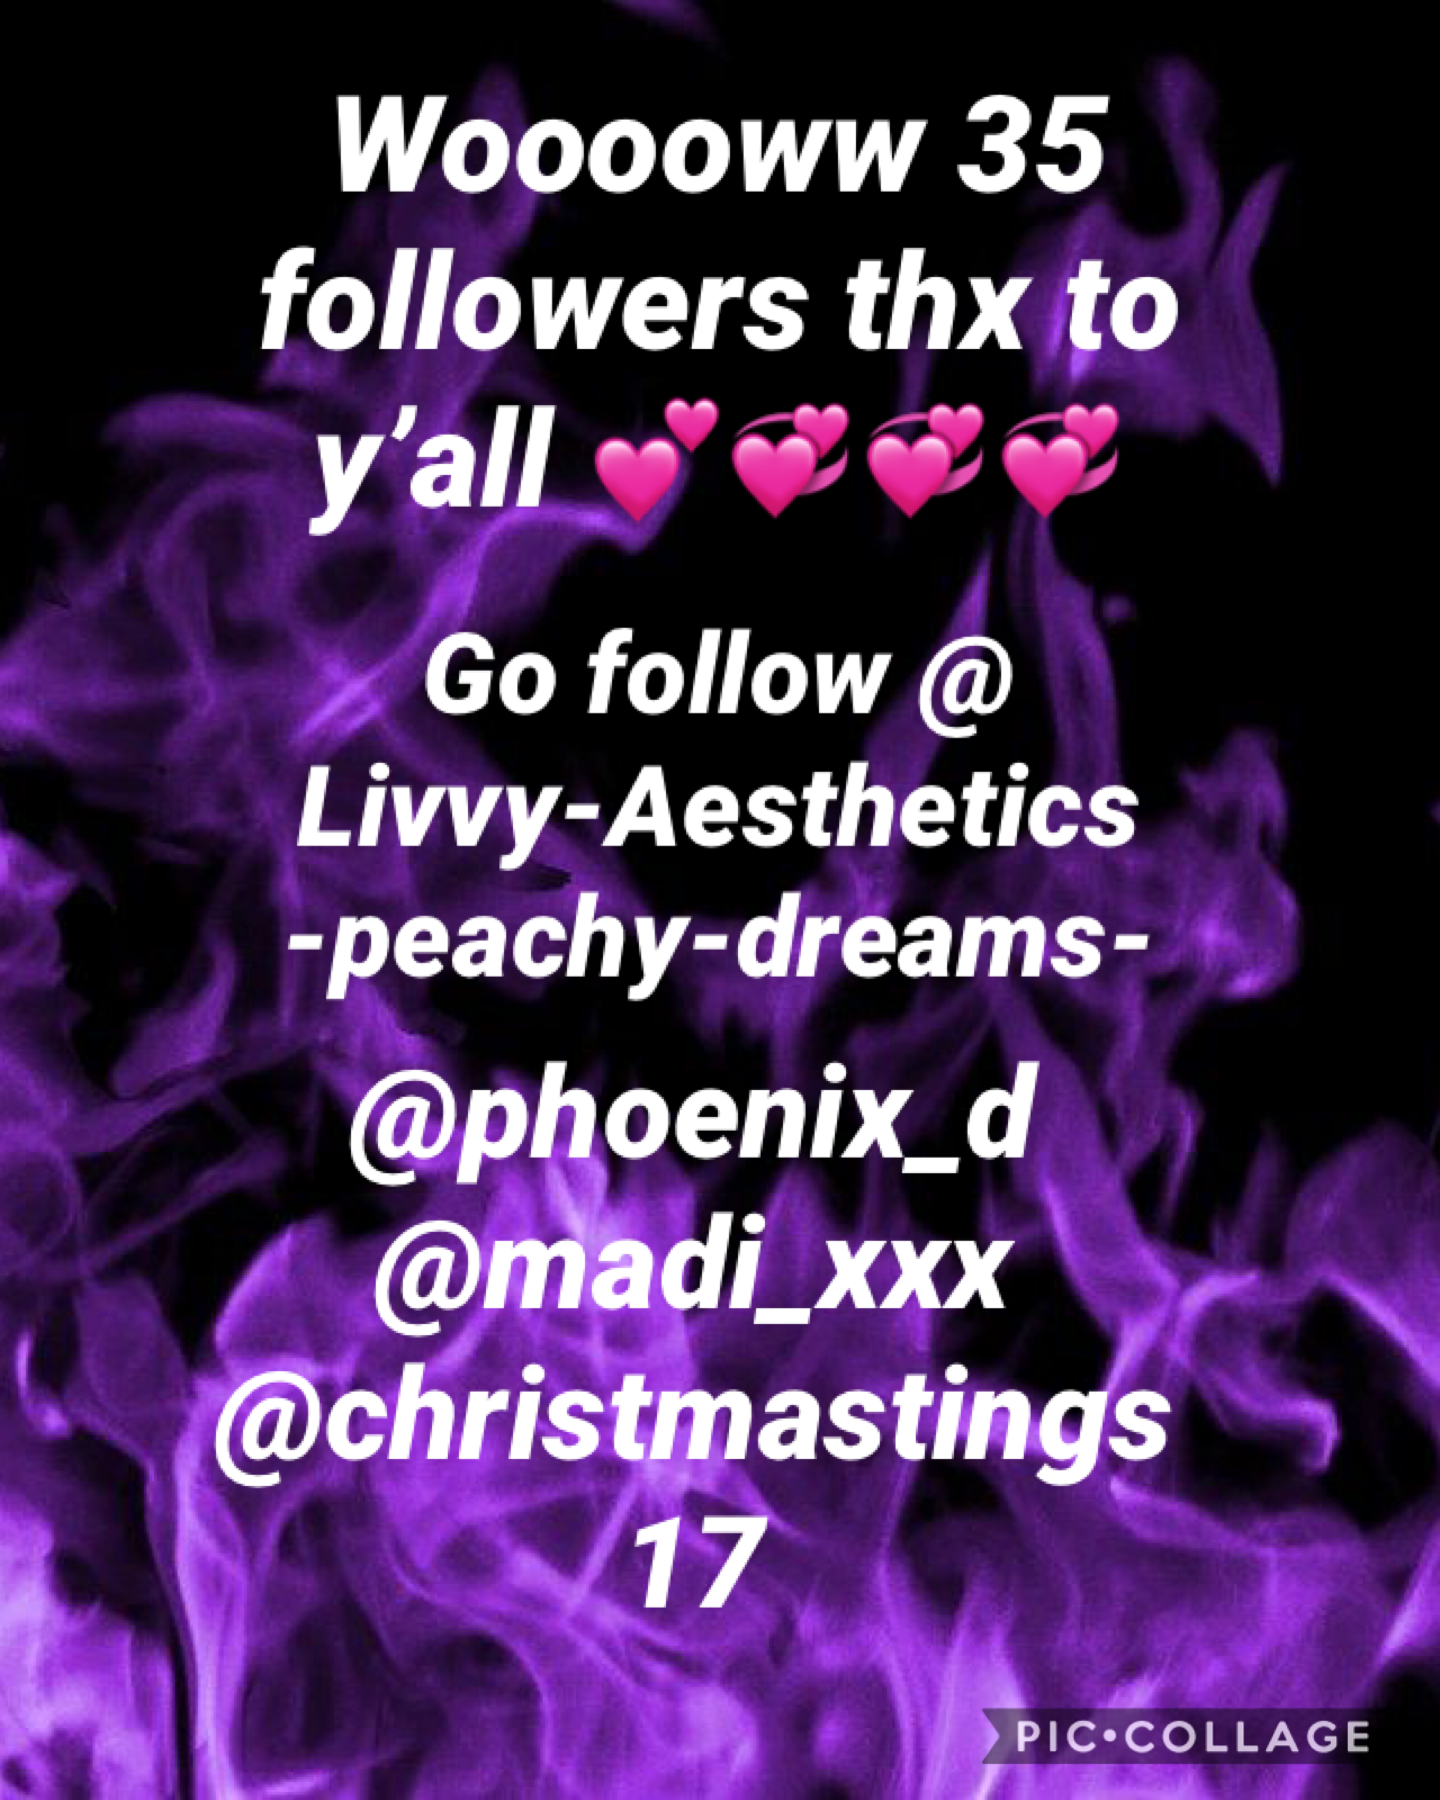 TAP
GO FOLLOW 
These ppl are so amazingg!!!